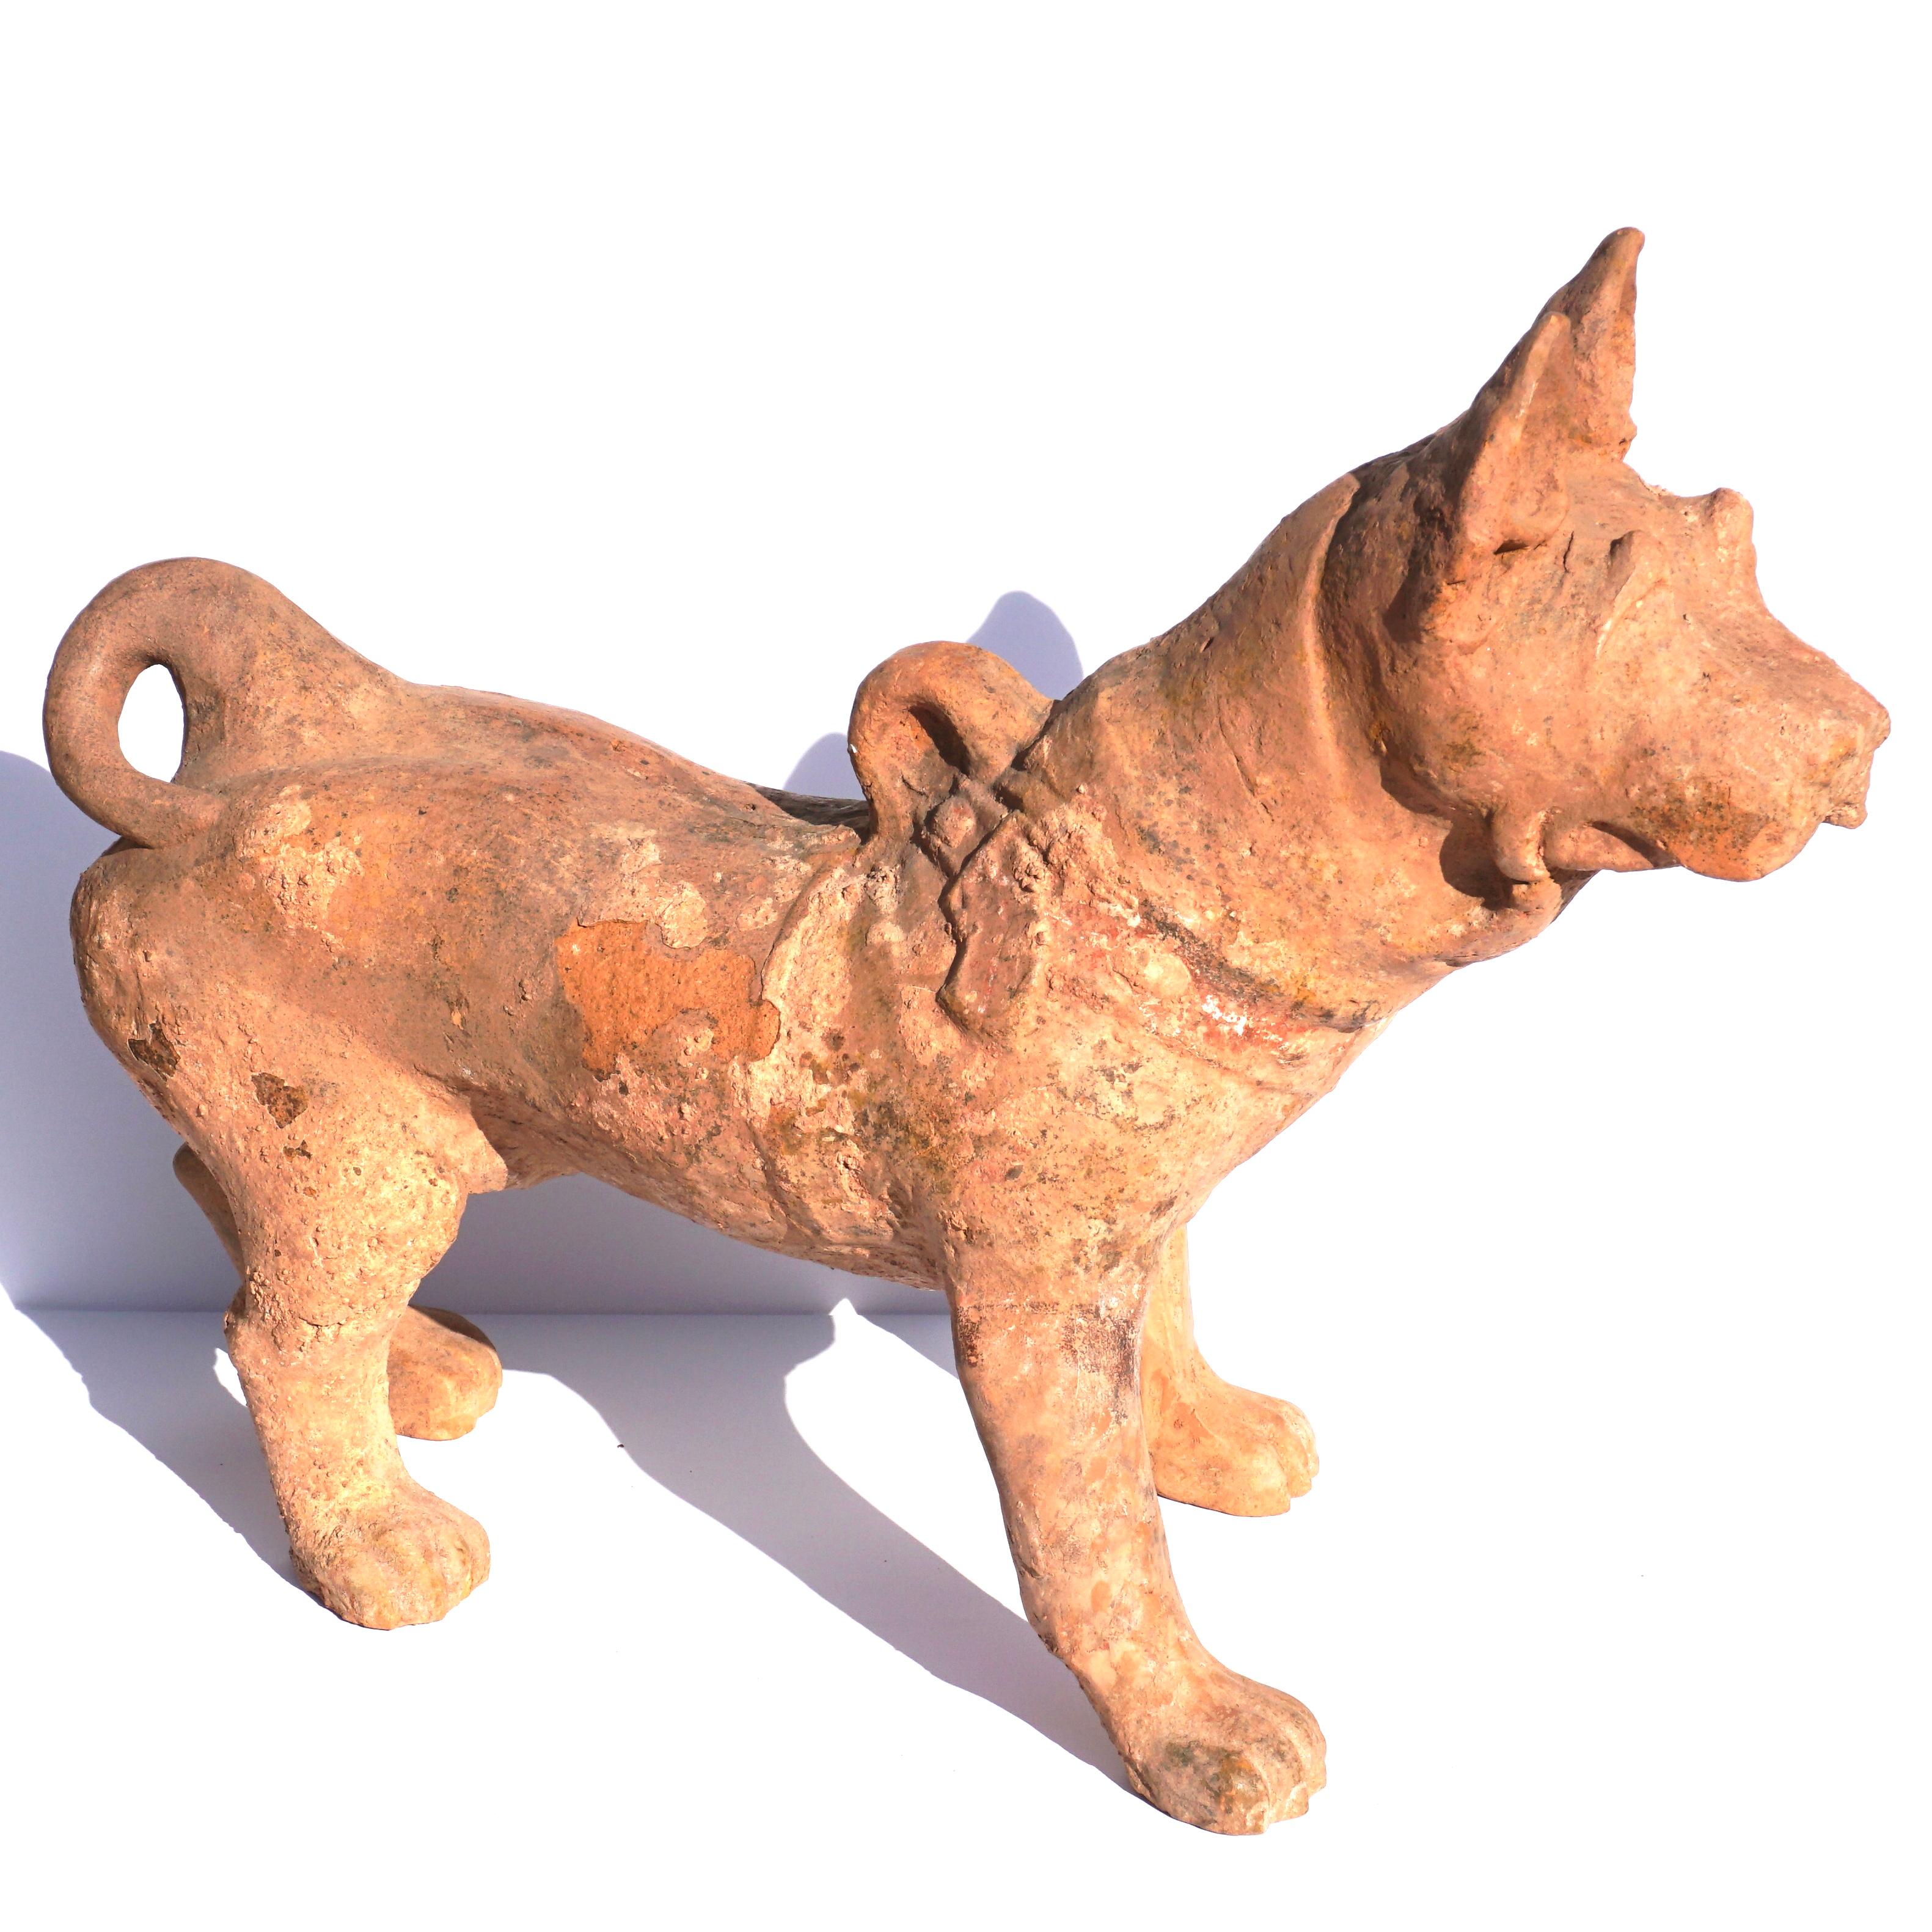 Han Dynasty life size Terracotta sculpture of a dog. 

Buried in a tomb for thousands of years; this mingqi companion has decided to come back and accompany the living. I’m actually taking a liking to this pup; most probably a fierce pit bull breed.